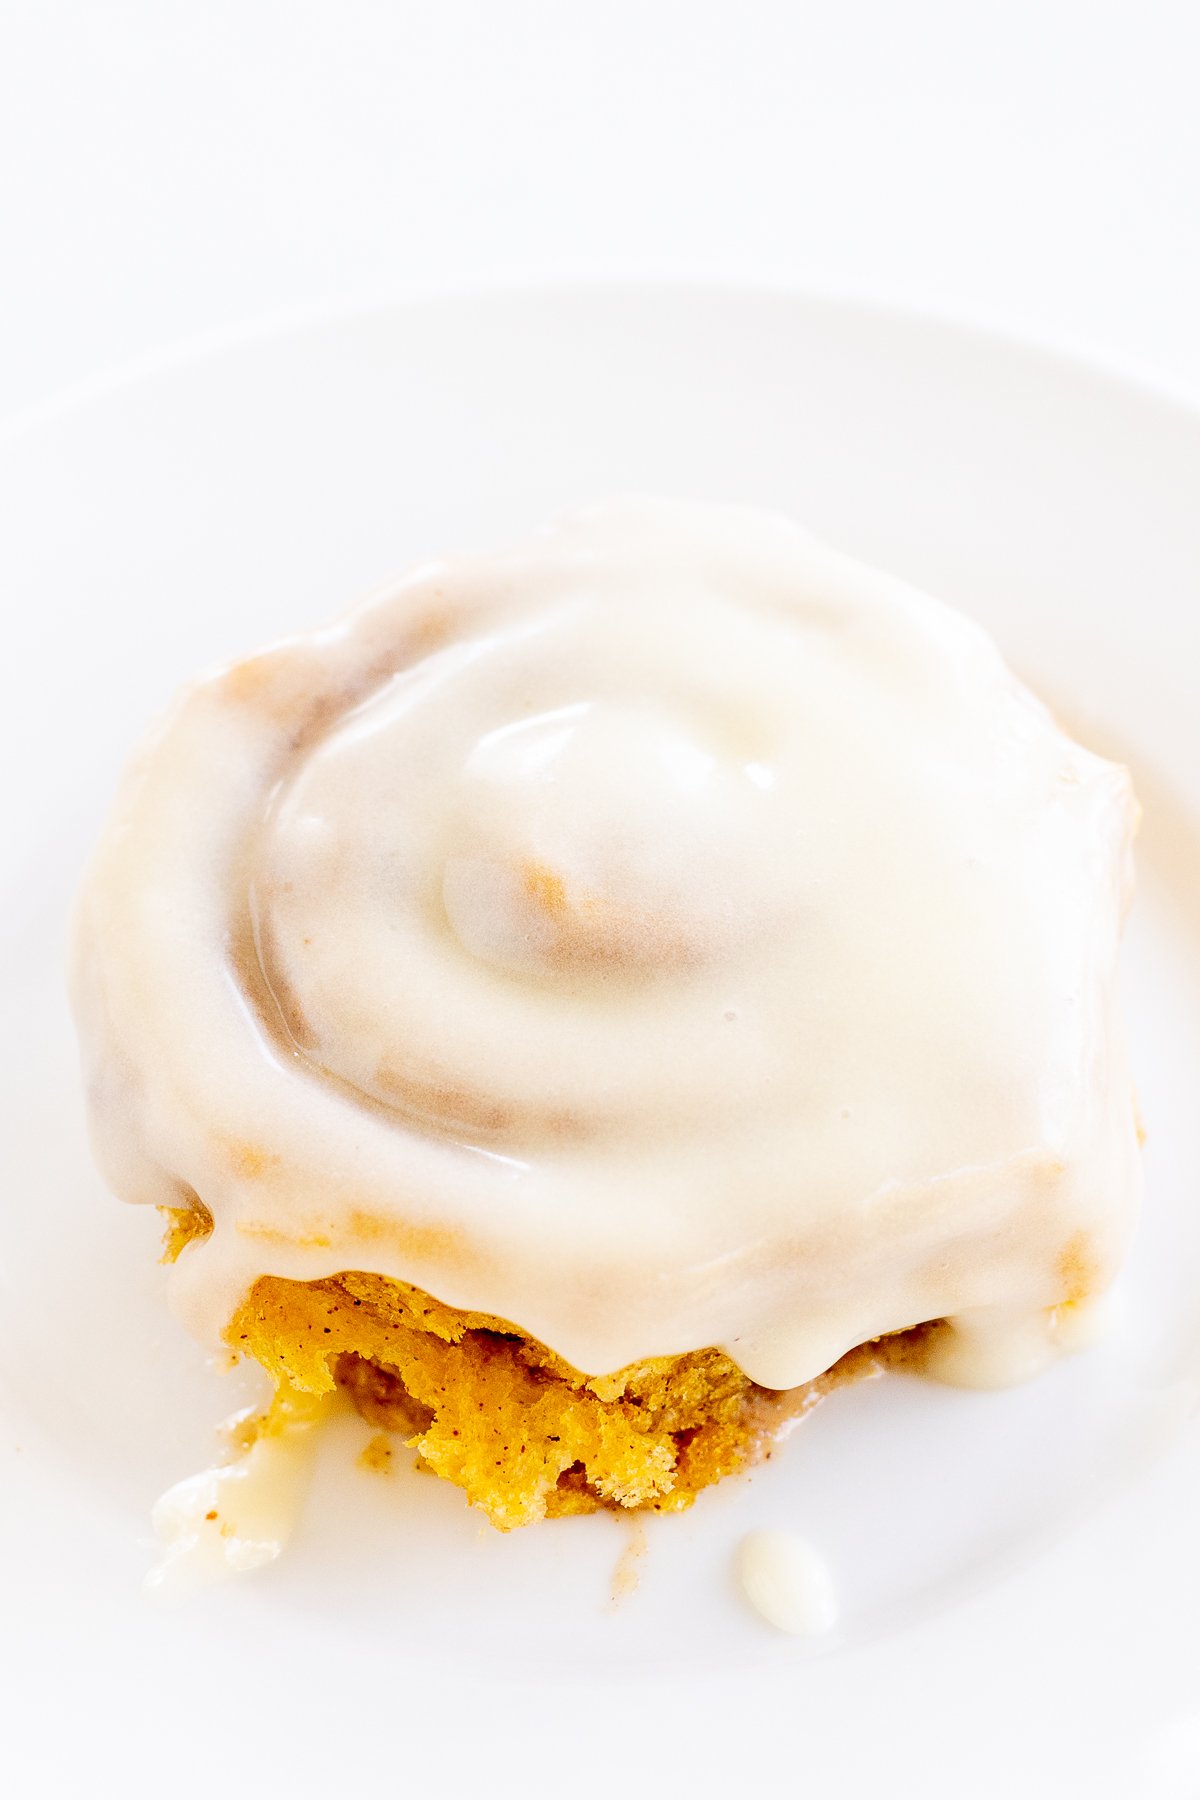 A cinnamon roll with cream cheese icing on a white plate, partially bitten.